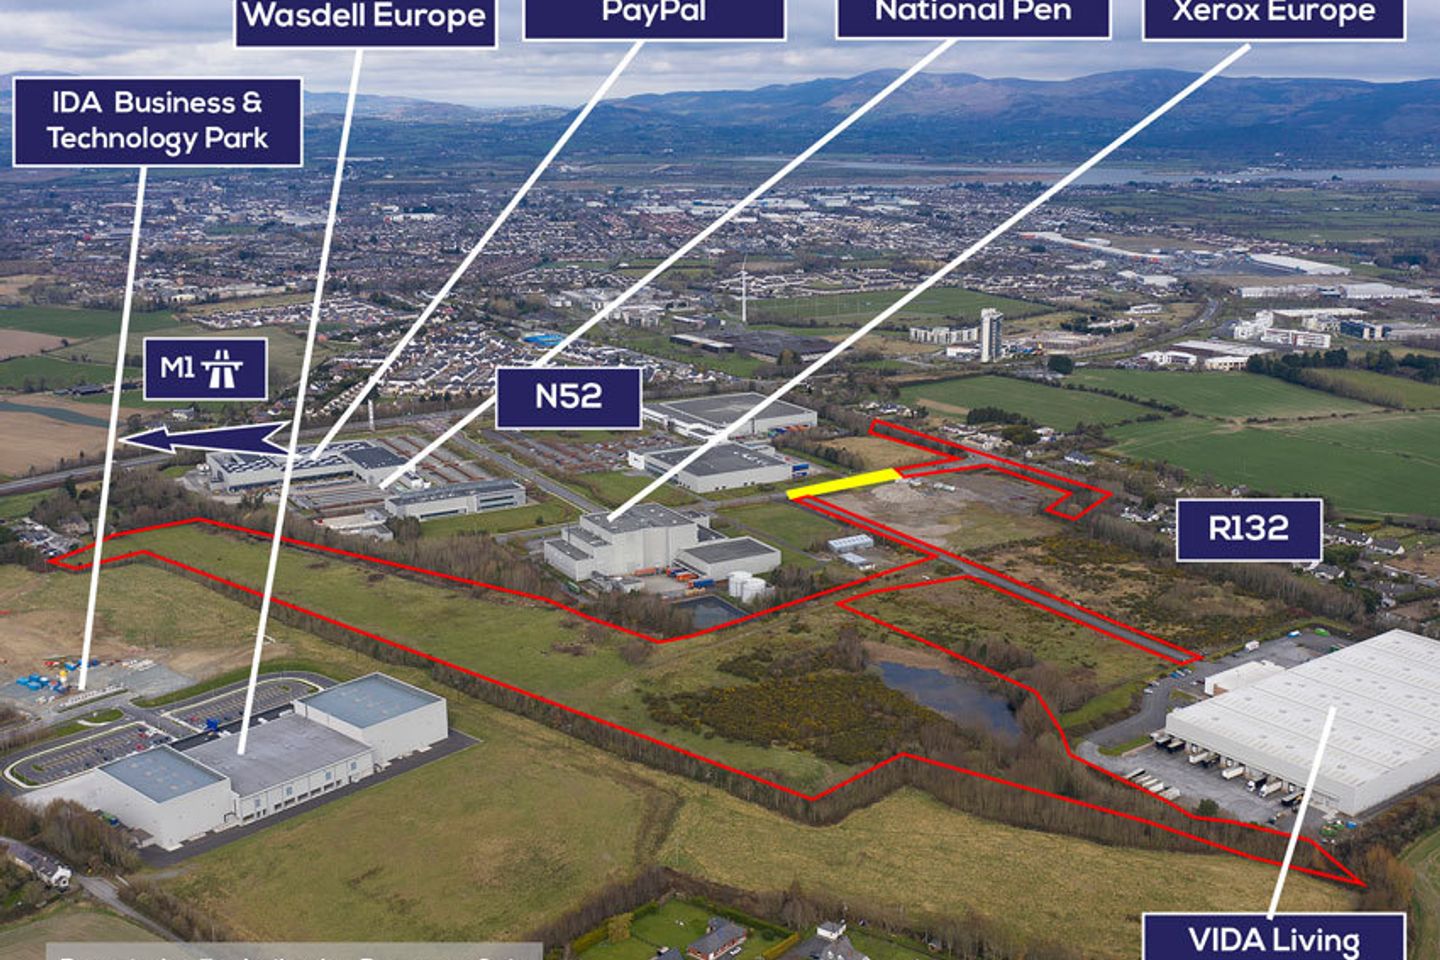 22.27 Acres, Lands Adjoining Xerox Technology Park, Dundalk, Co. Louth